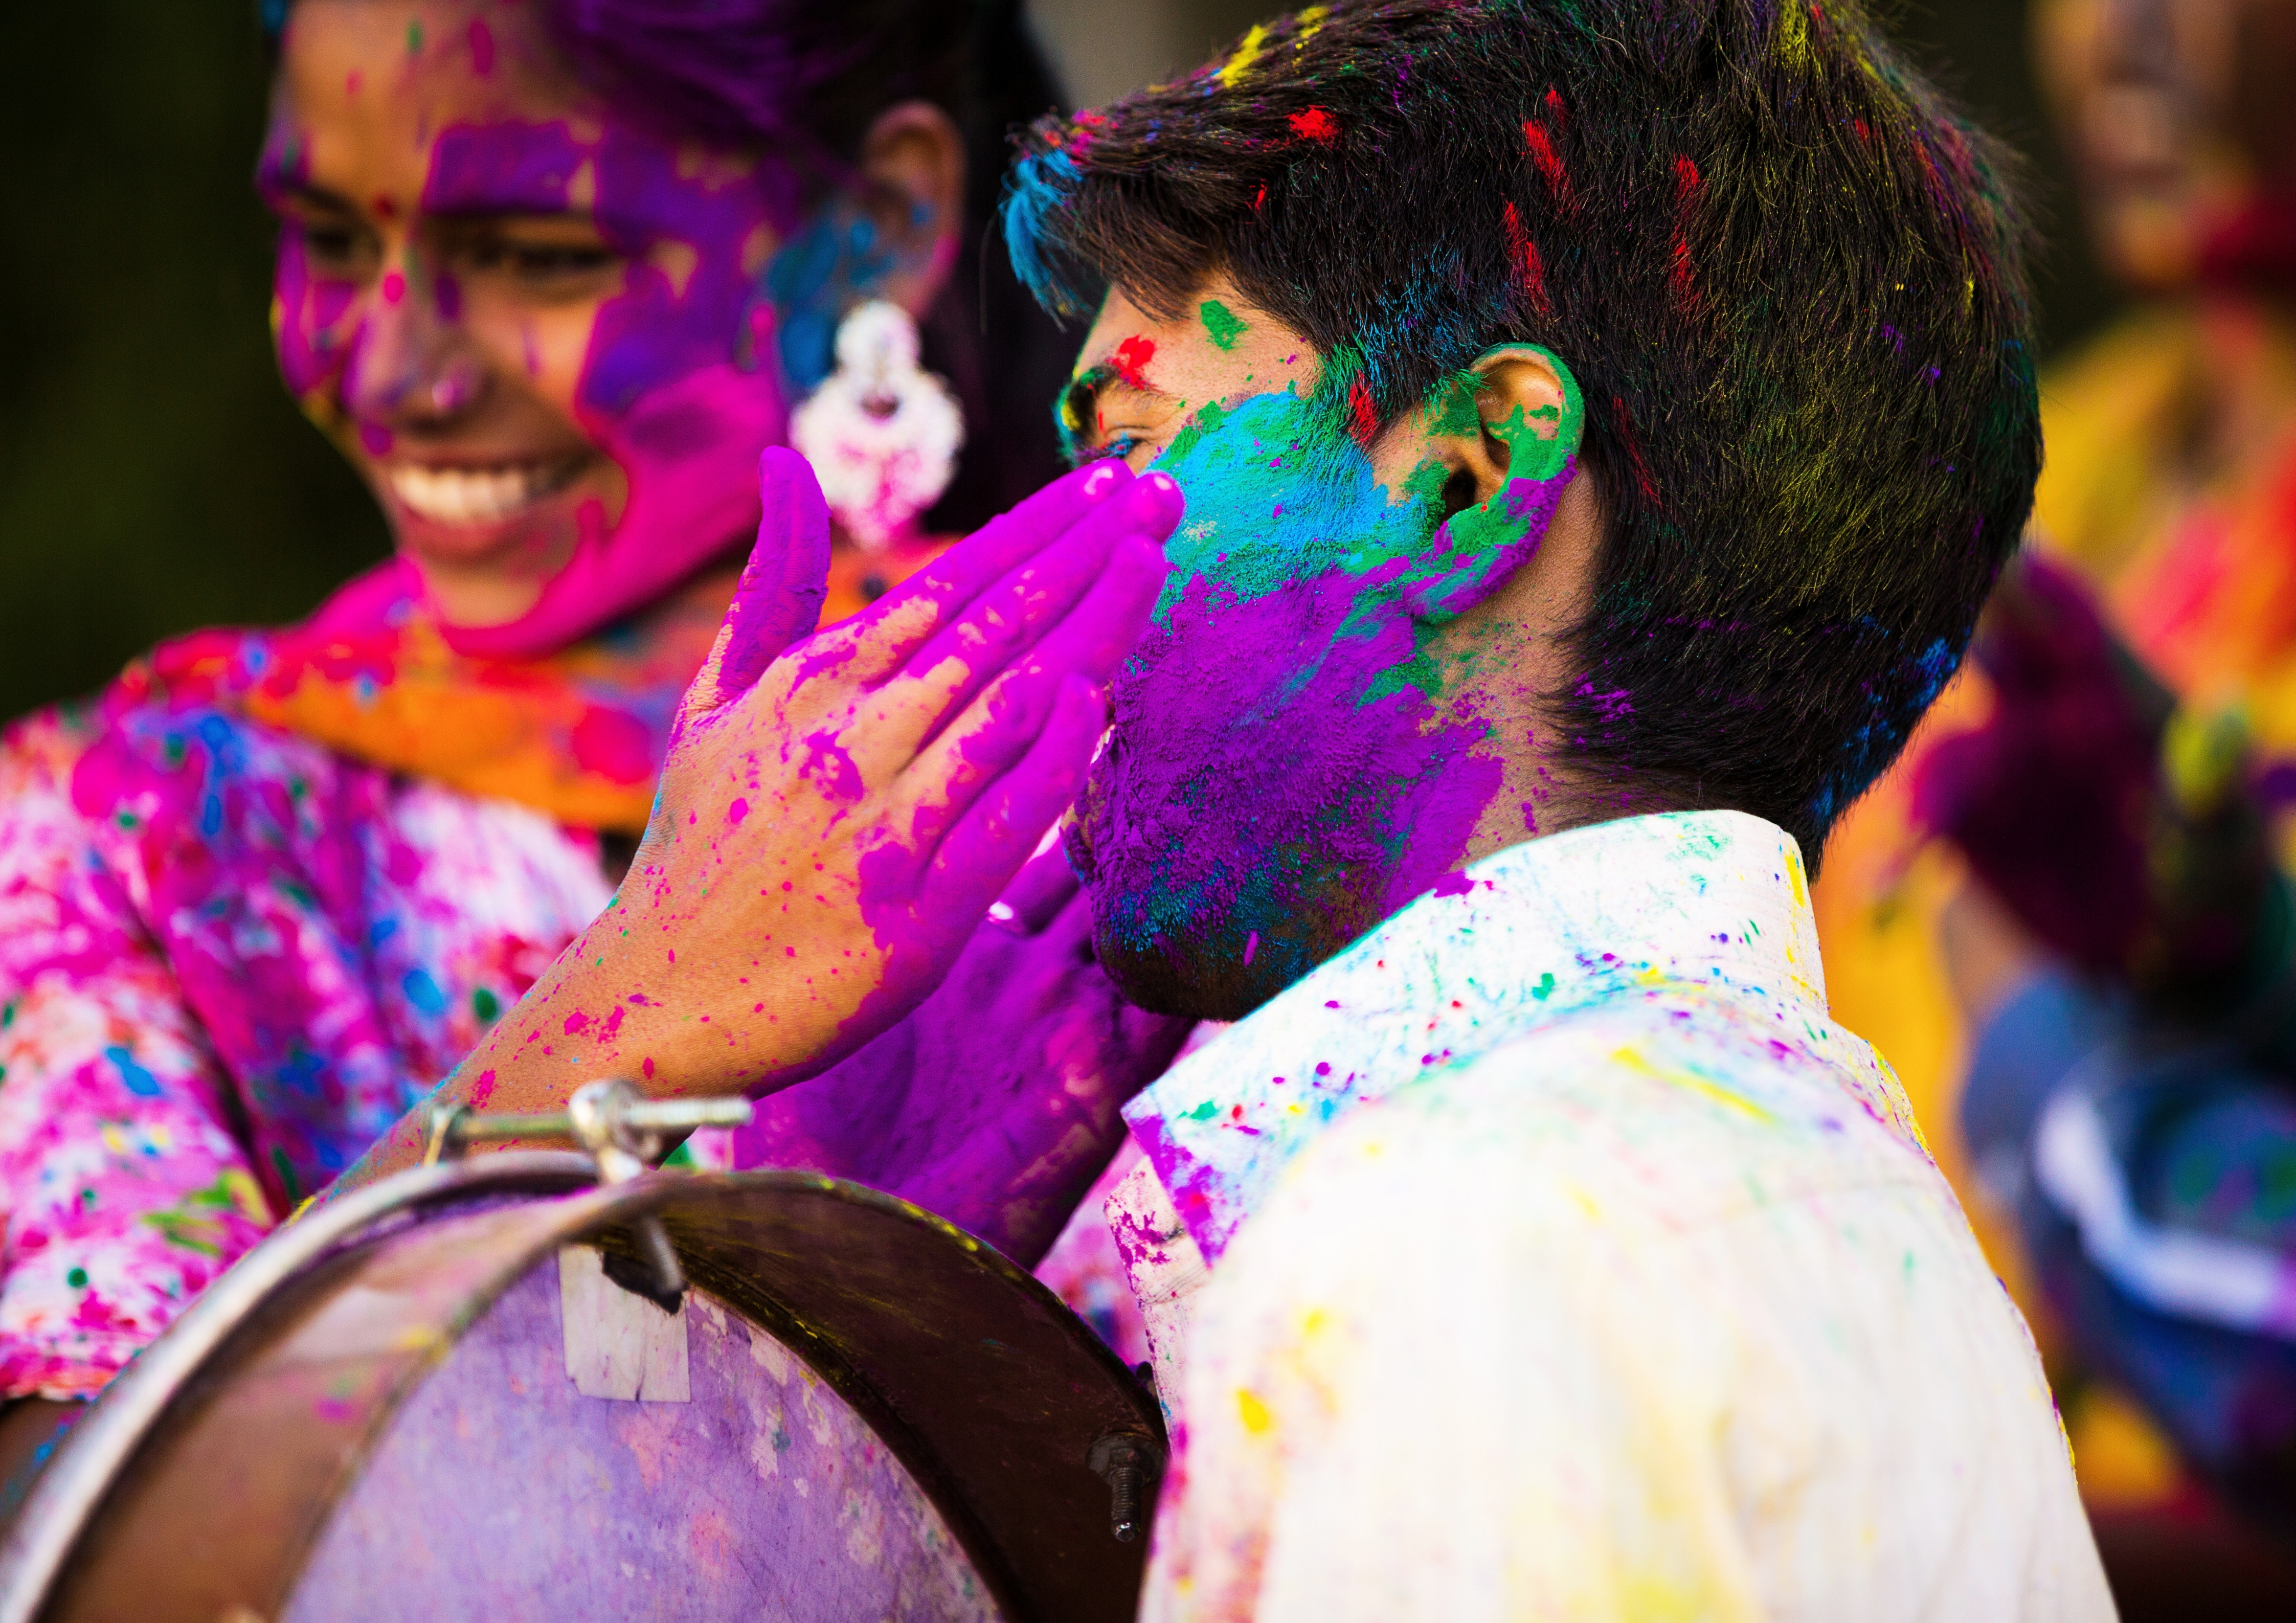 The Festival of Colours